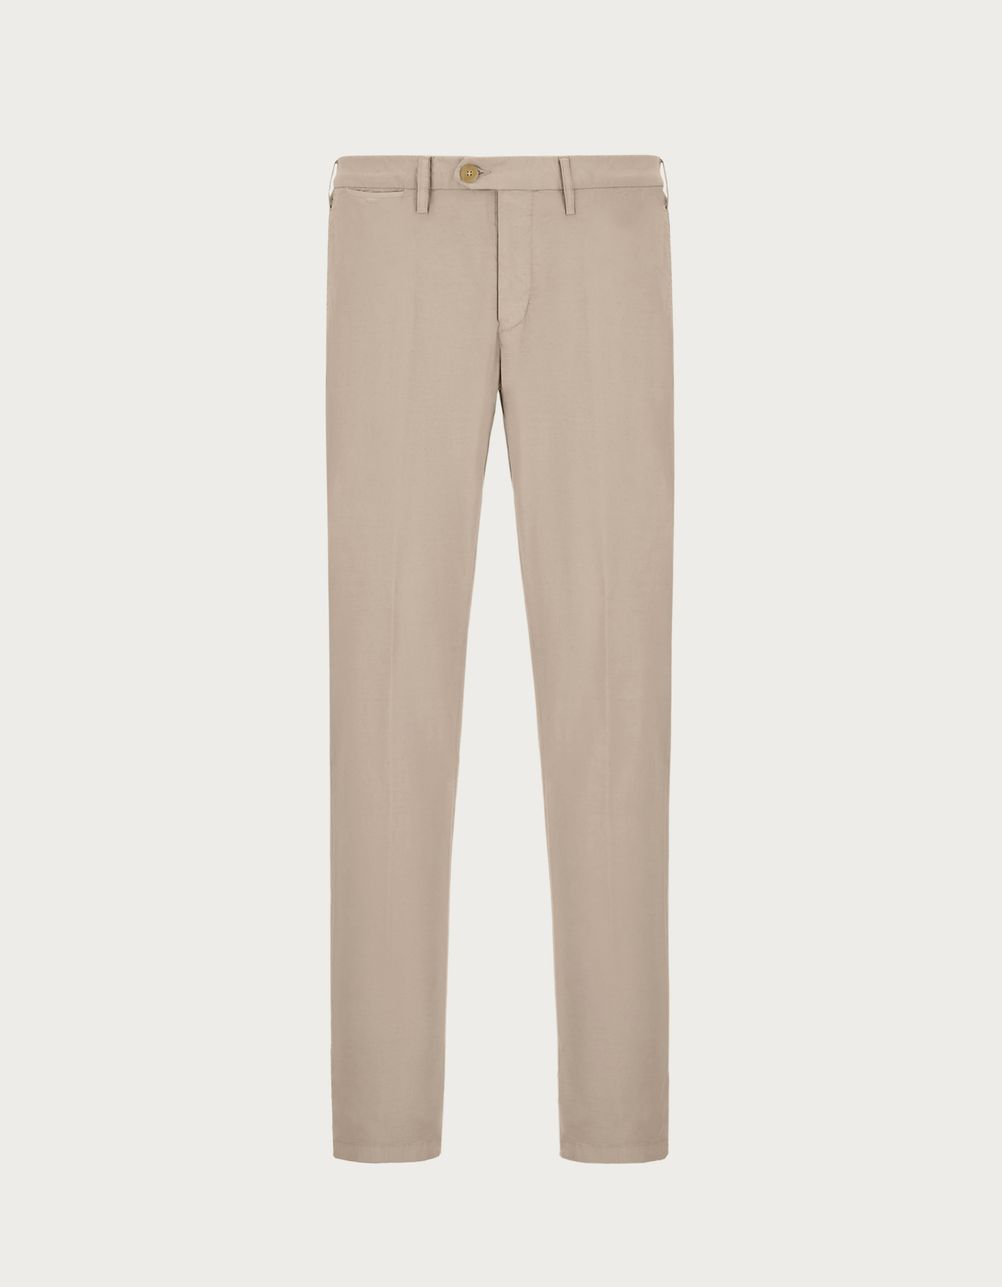 Chinos in sand garment-dyed cotton and silk twill